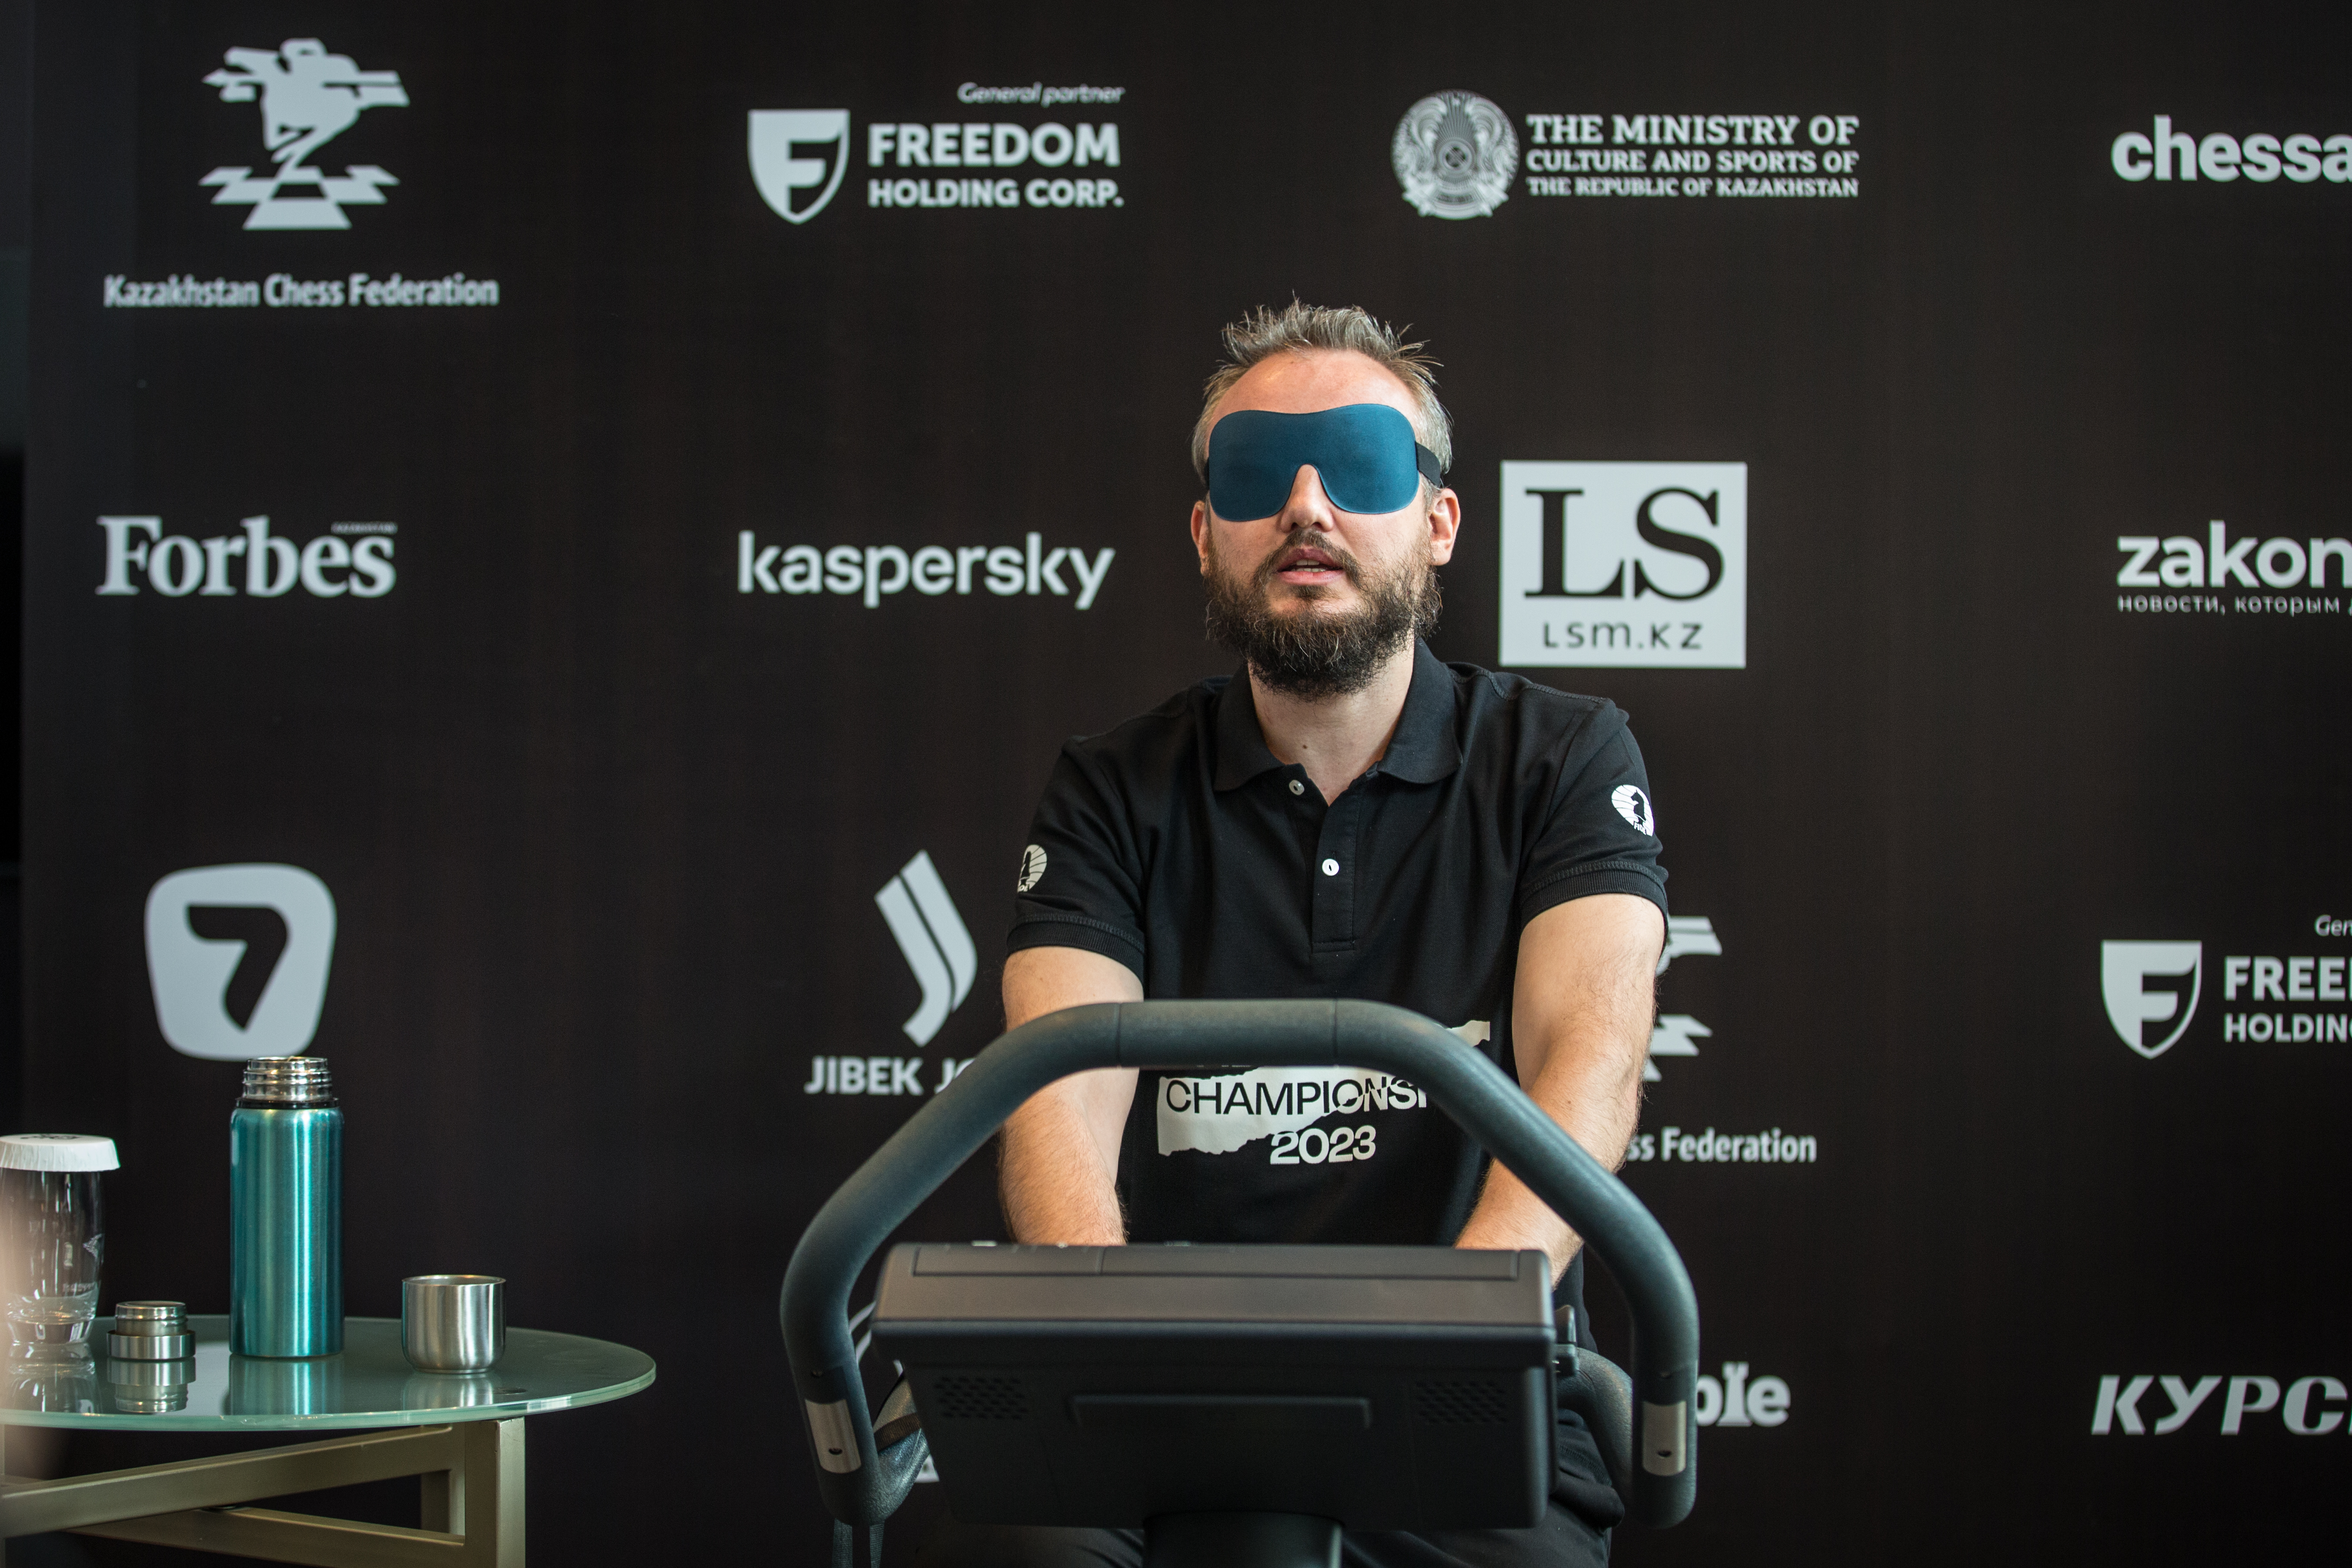 Who is the current blindfold chess champion? - Quora